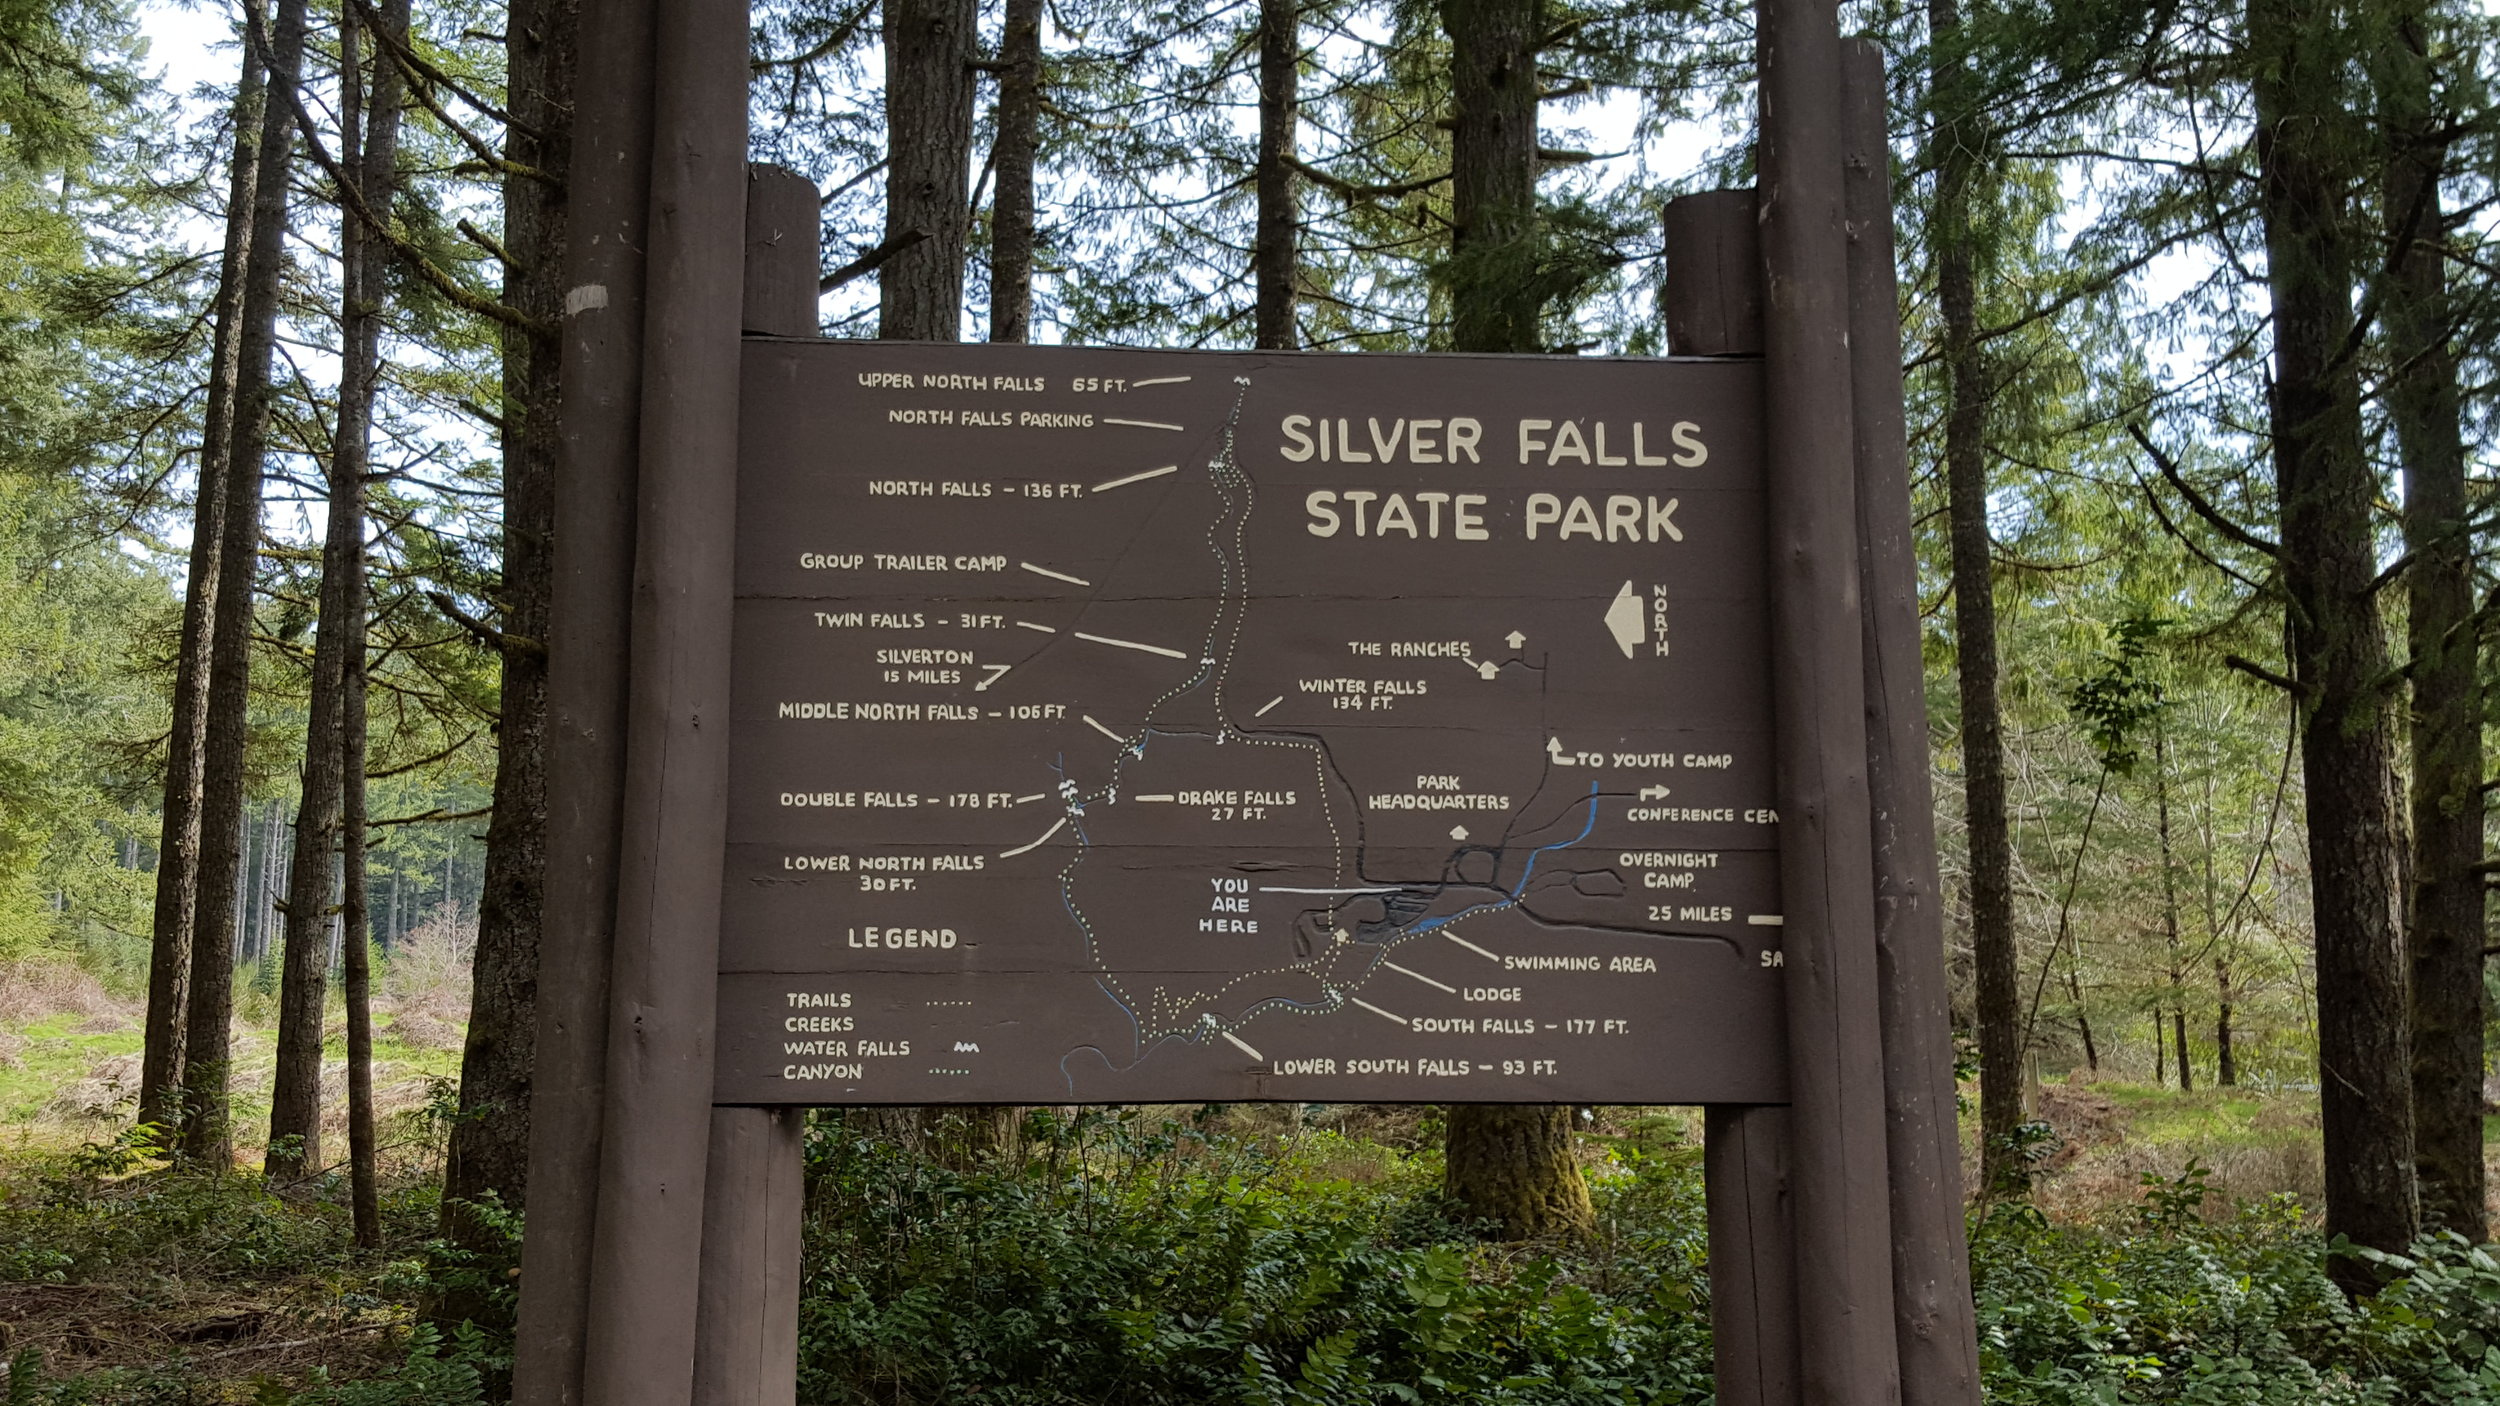 SILVER FALLS STATE PARK